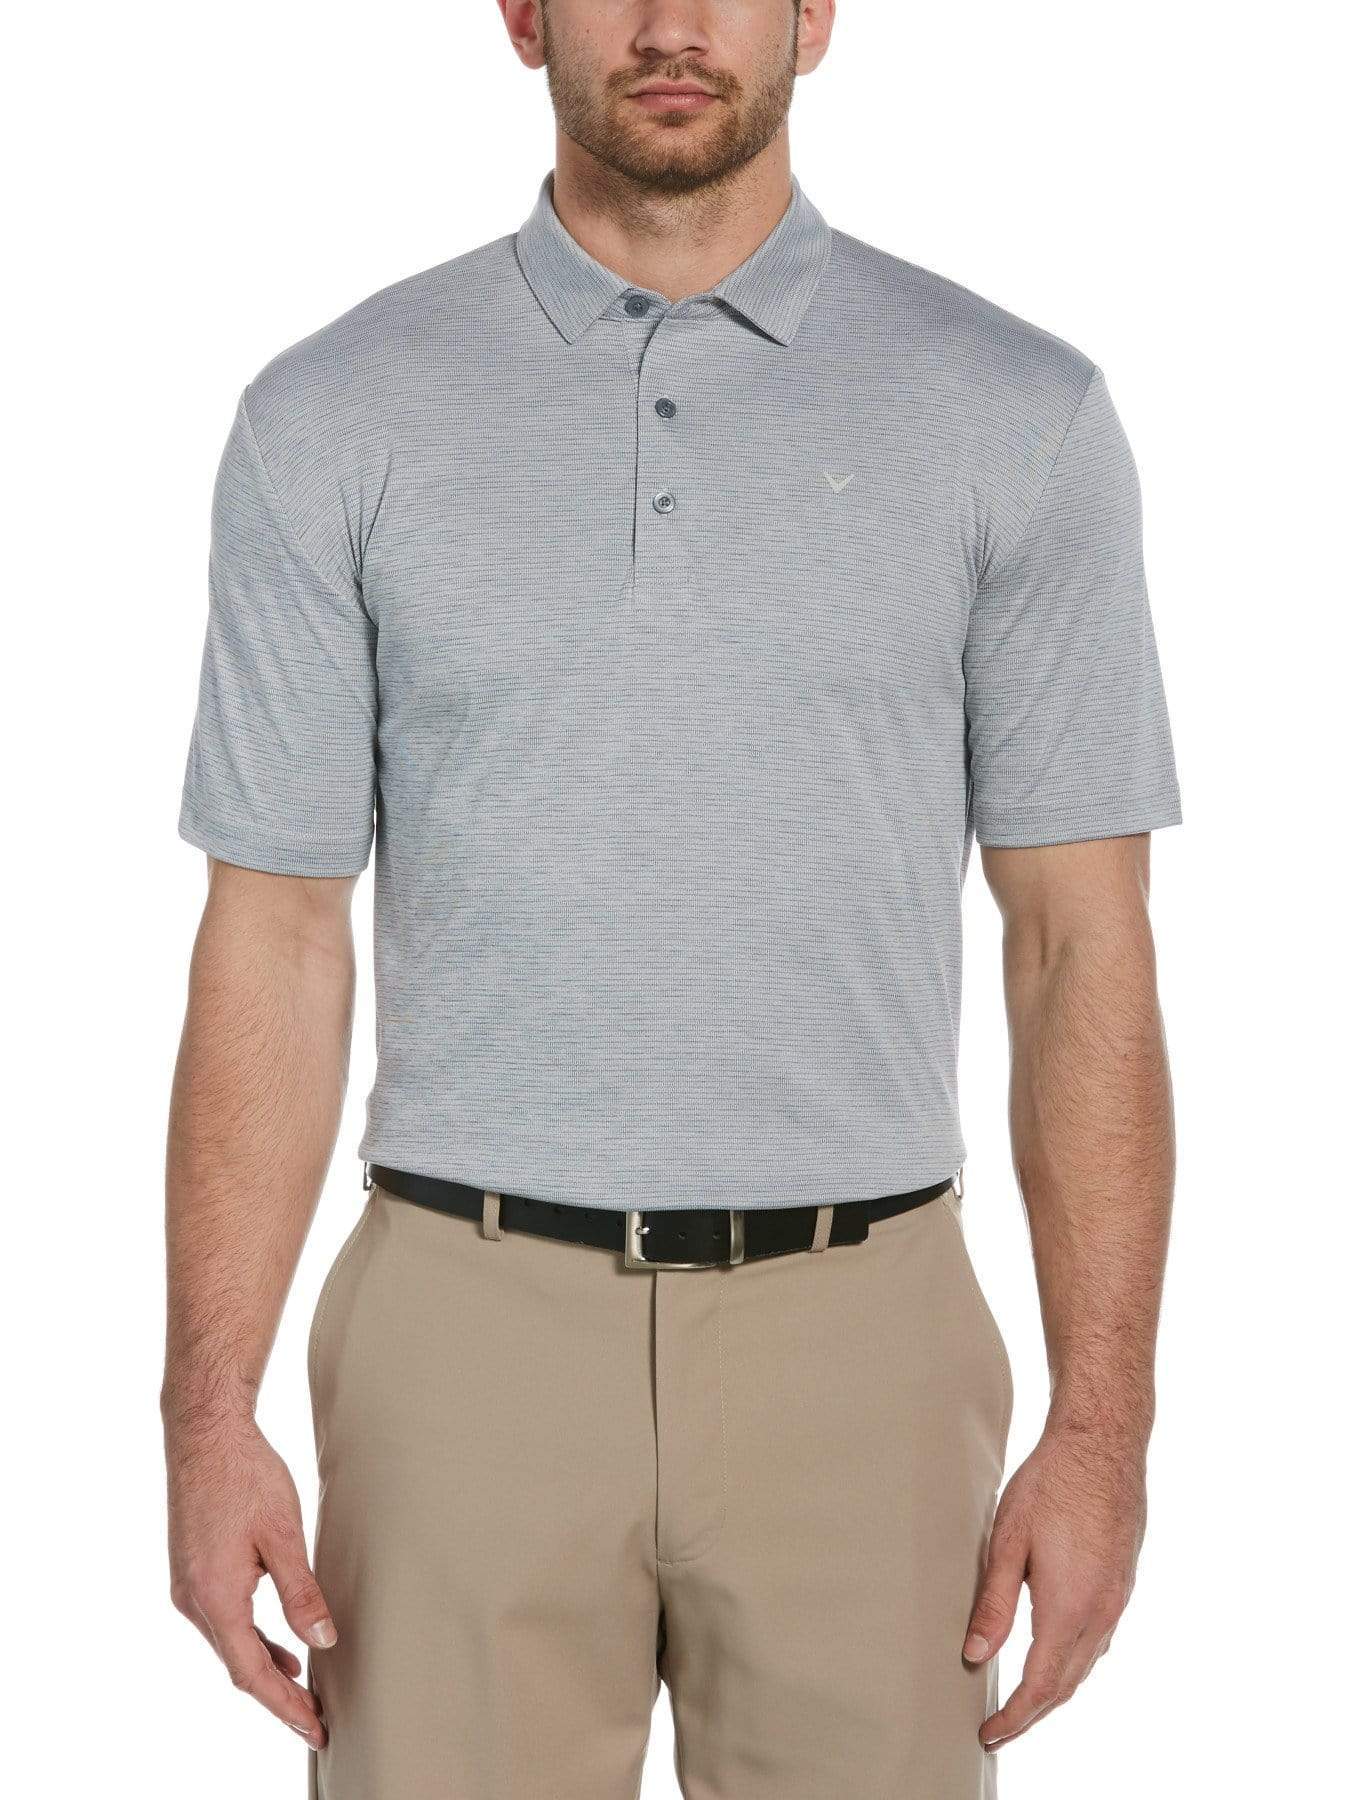 Callaway Apparel Mens Big & Tall Solid Textured Polo Shirt, Size 5X, Tradewinds Heather Gray, 100% Polyester | Golf Apparel Shop